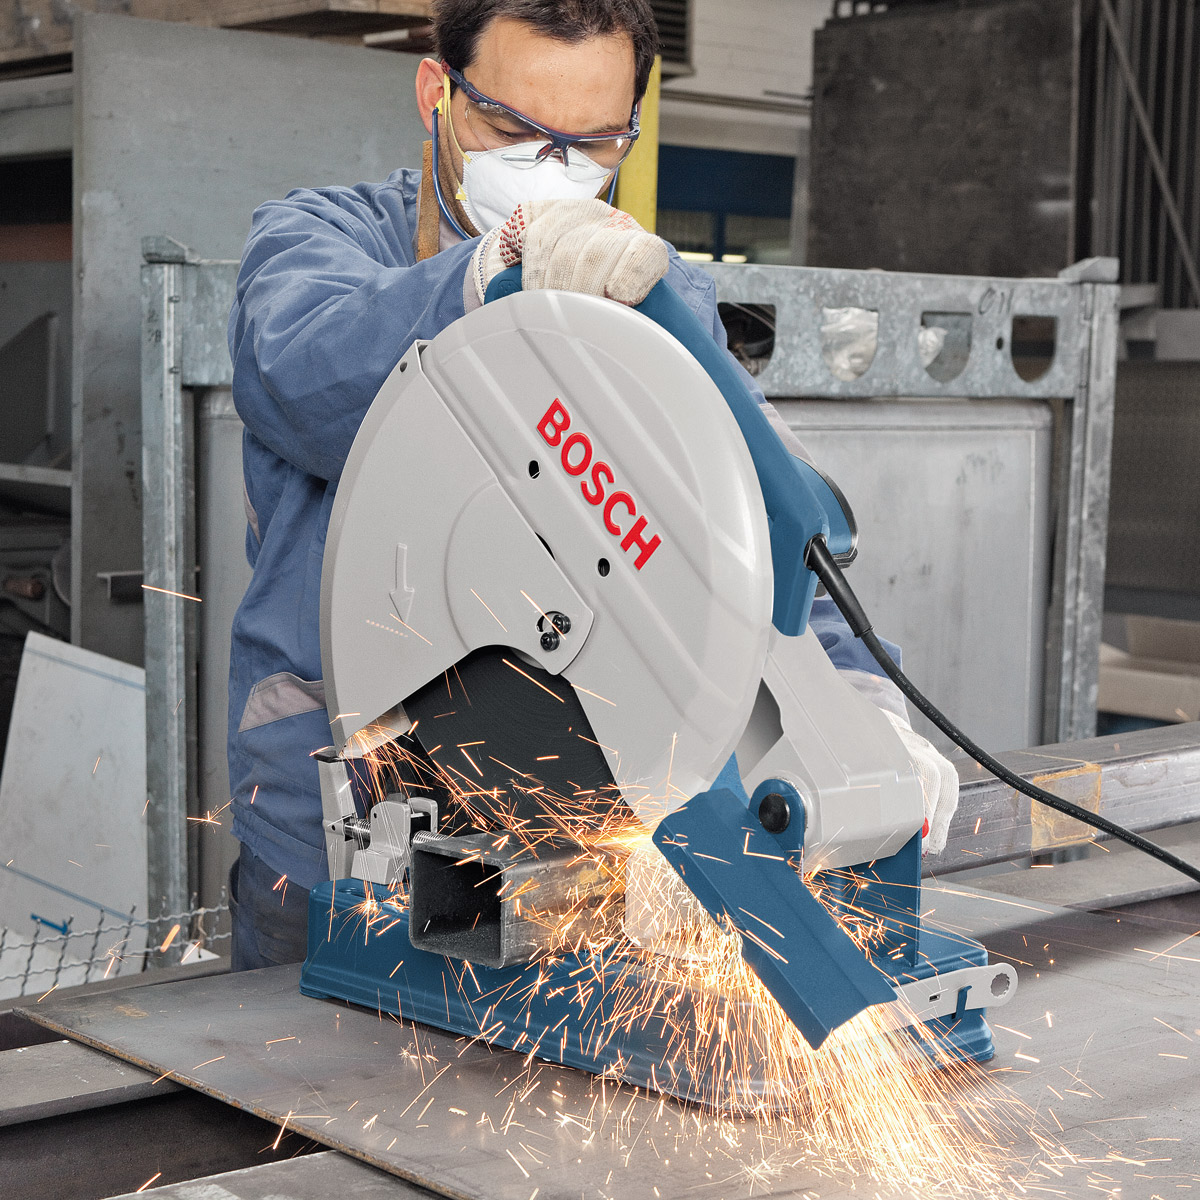 Abrasive Cut Off Saw Chop Saw Electric • Wellers Hire